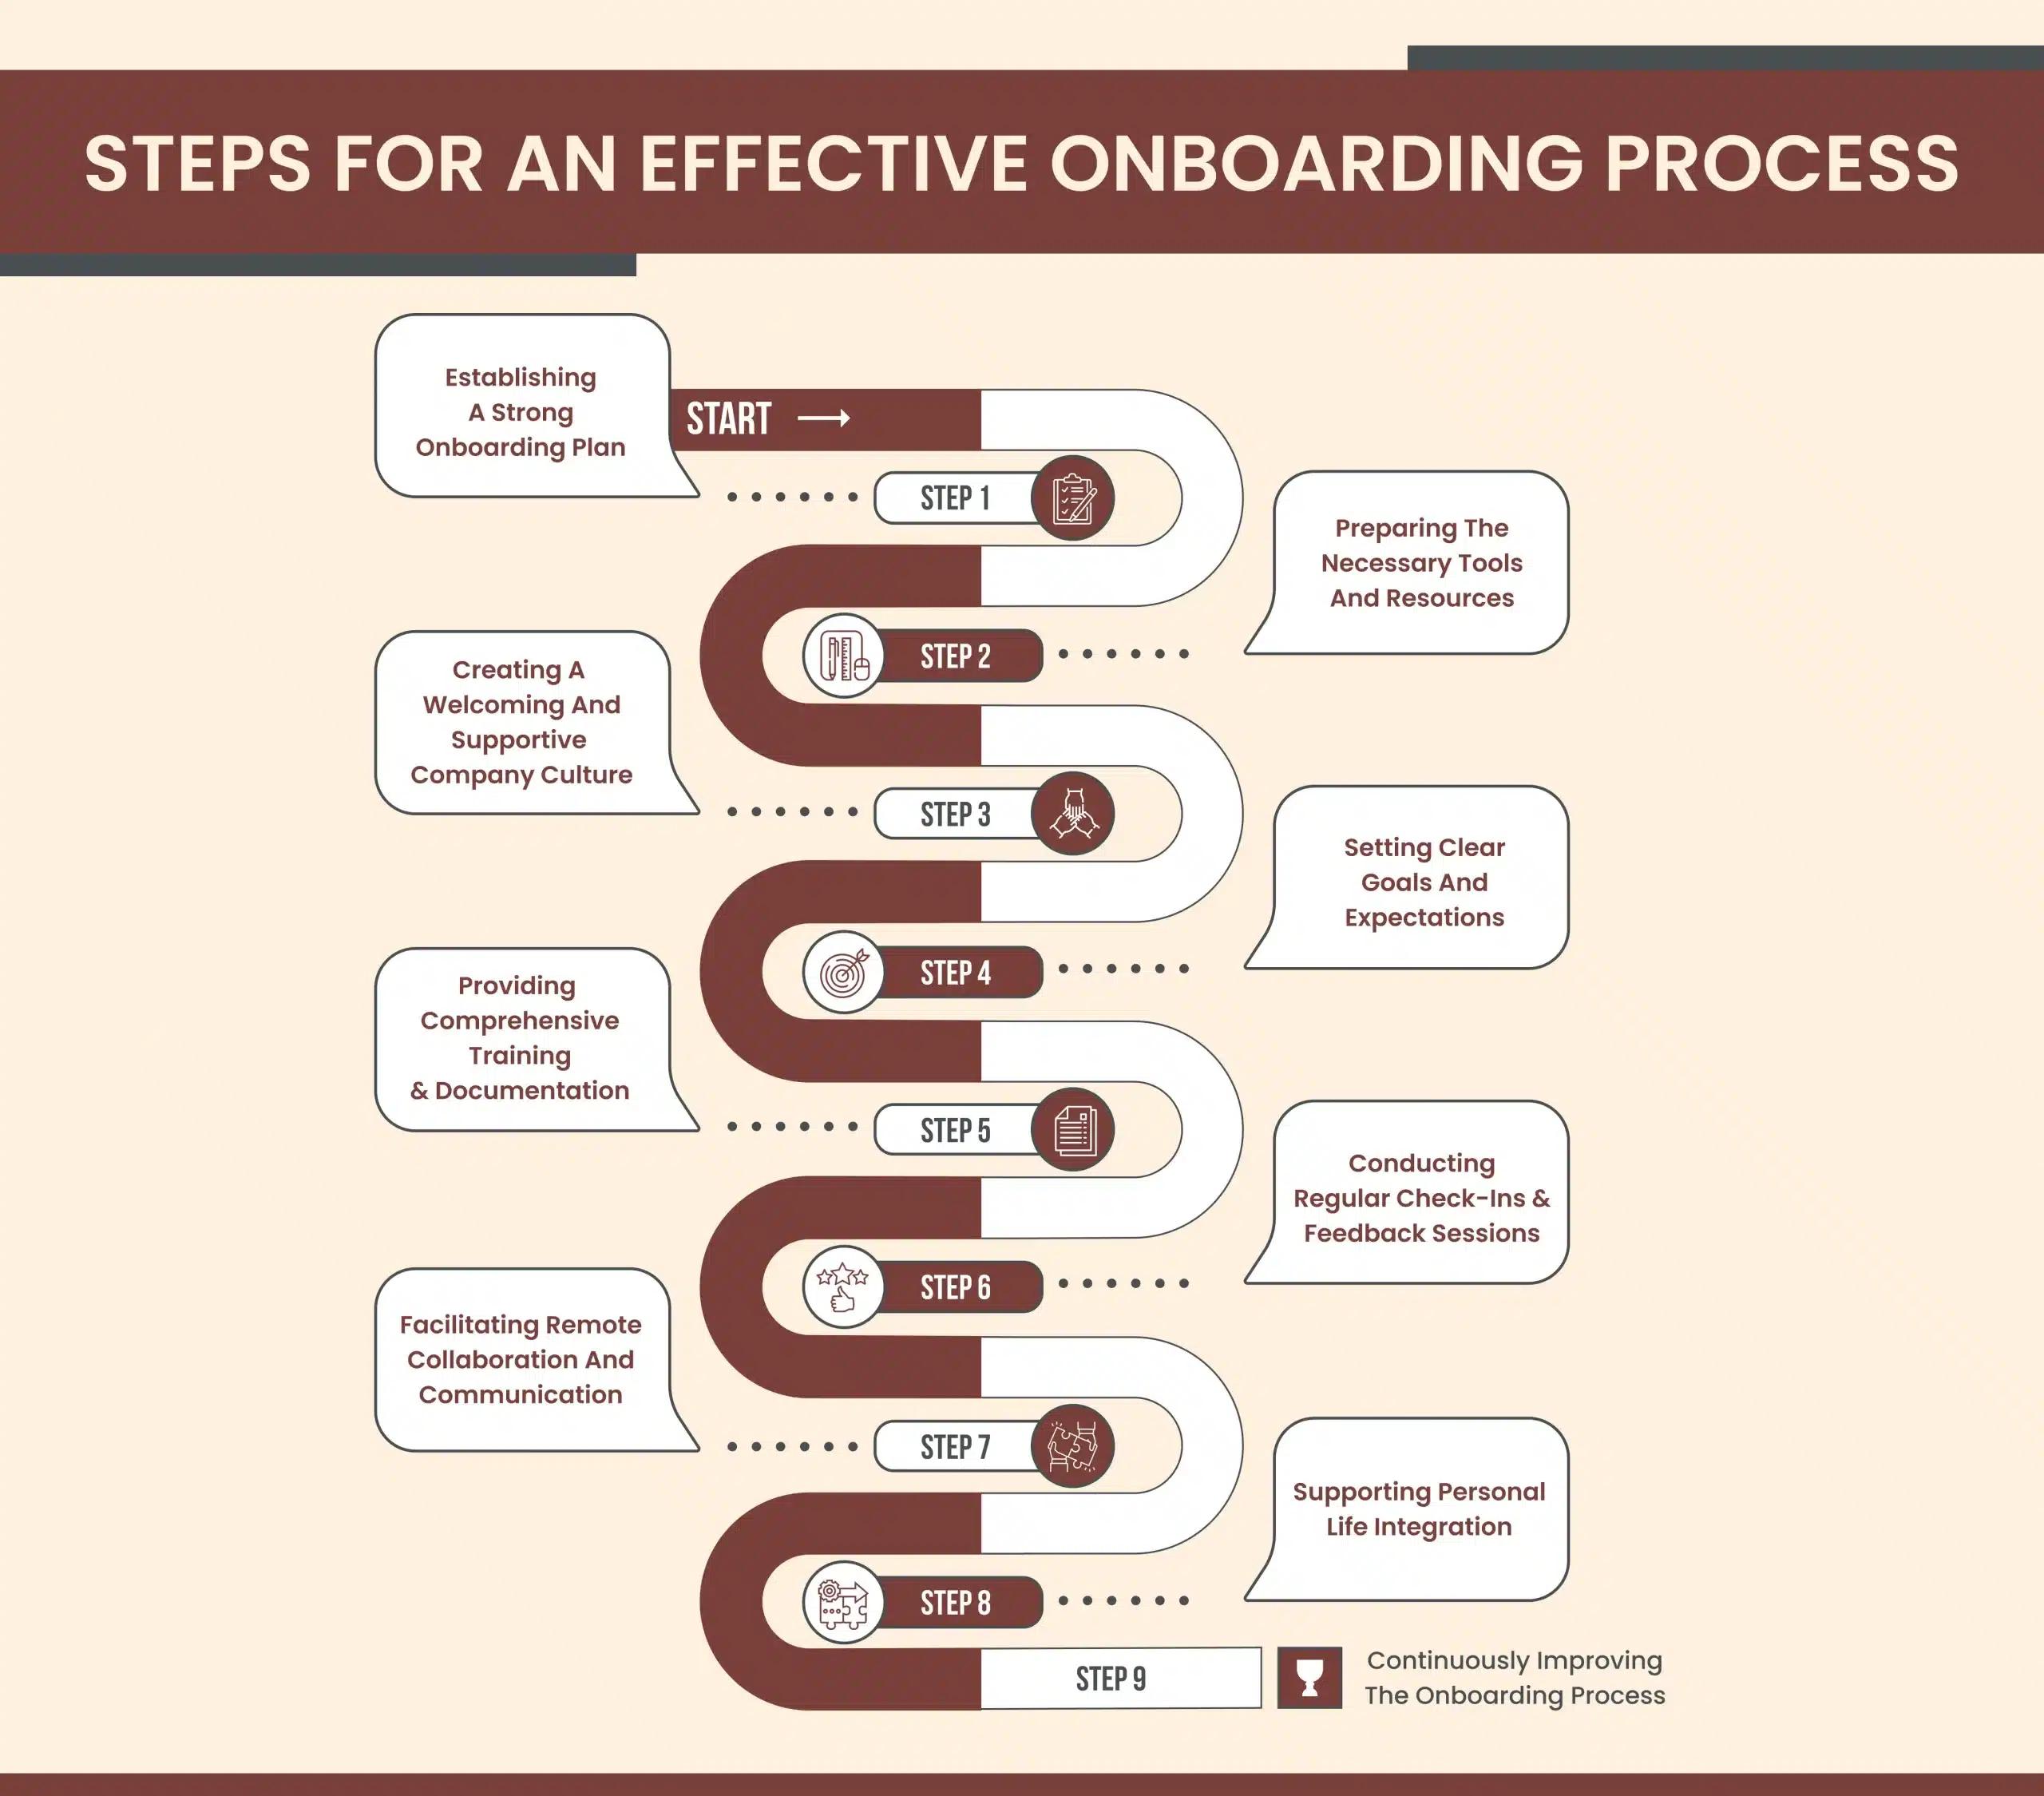 Steps for effective onboarding process